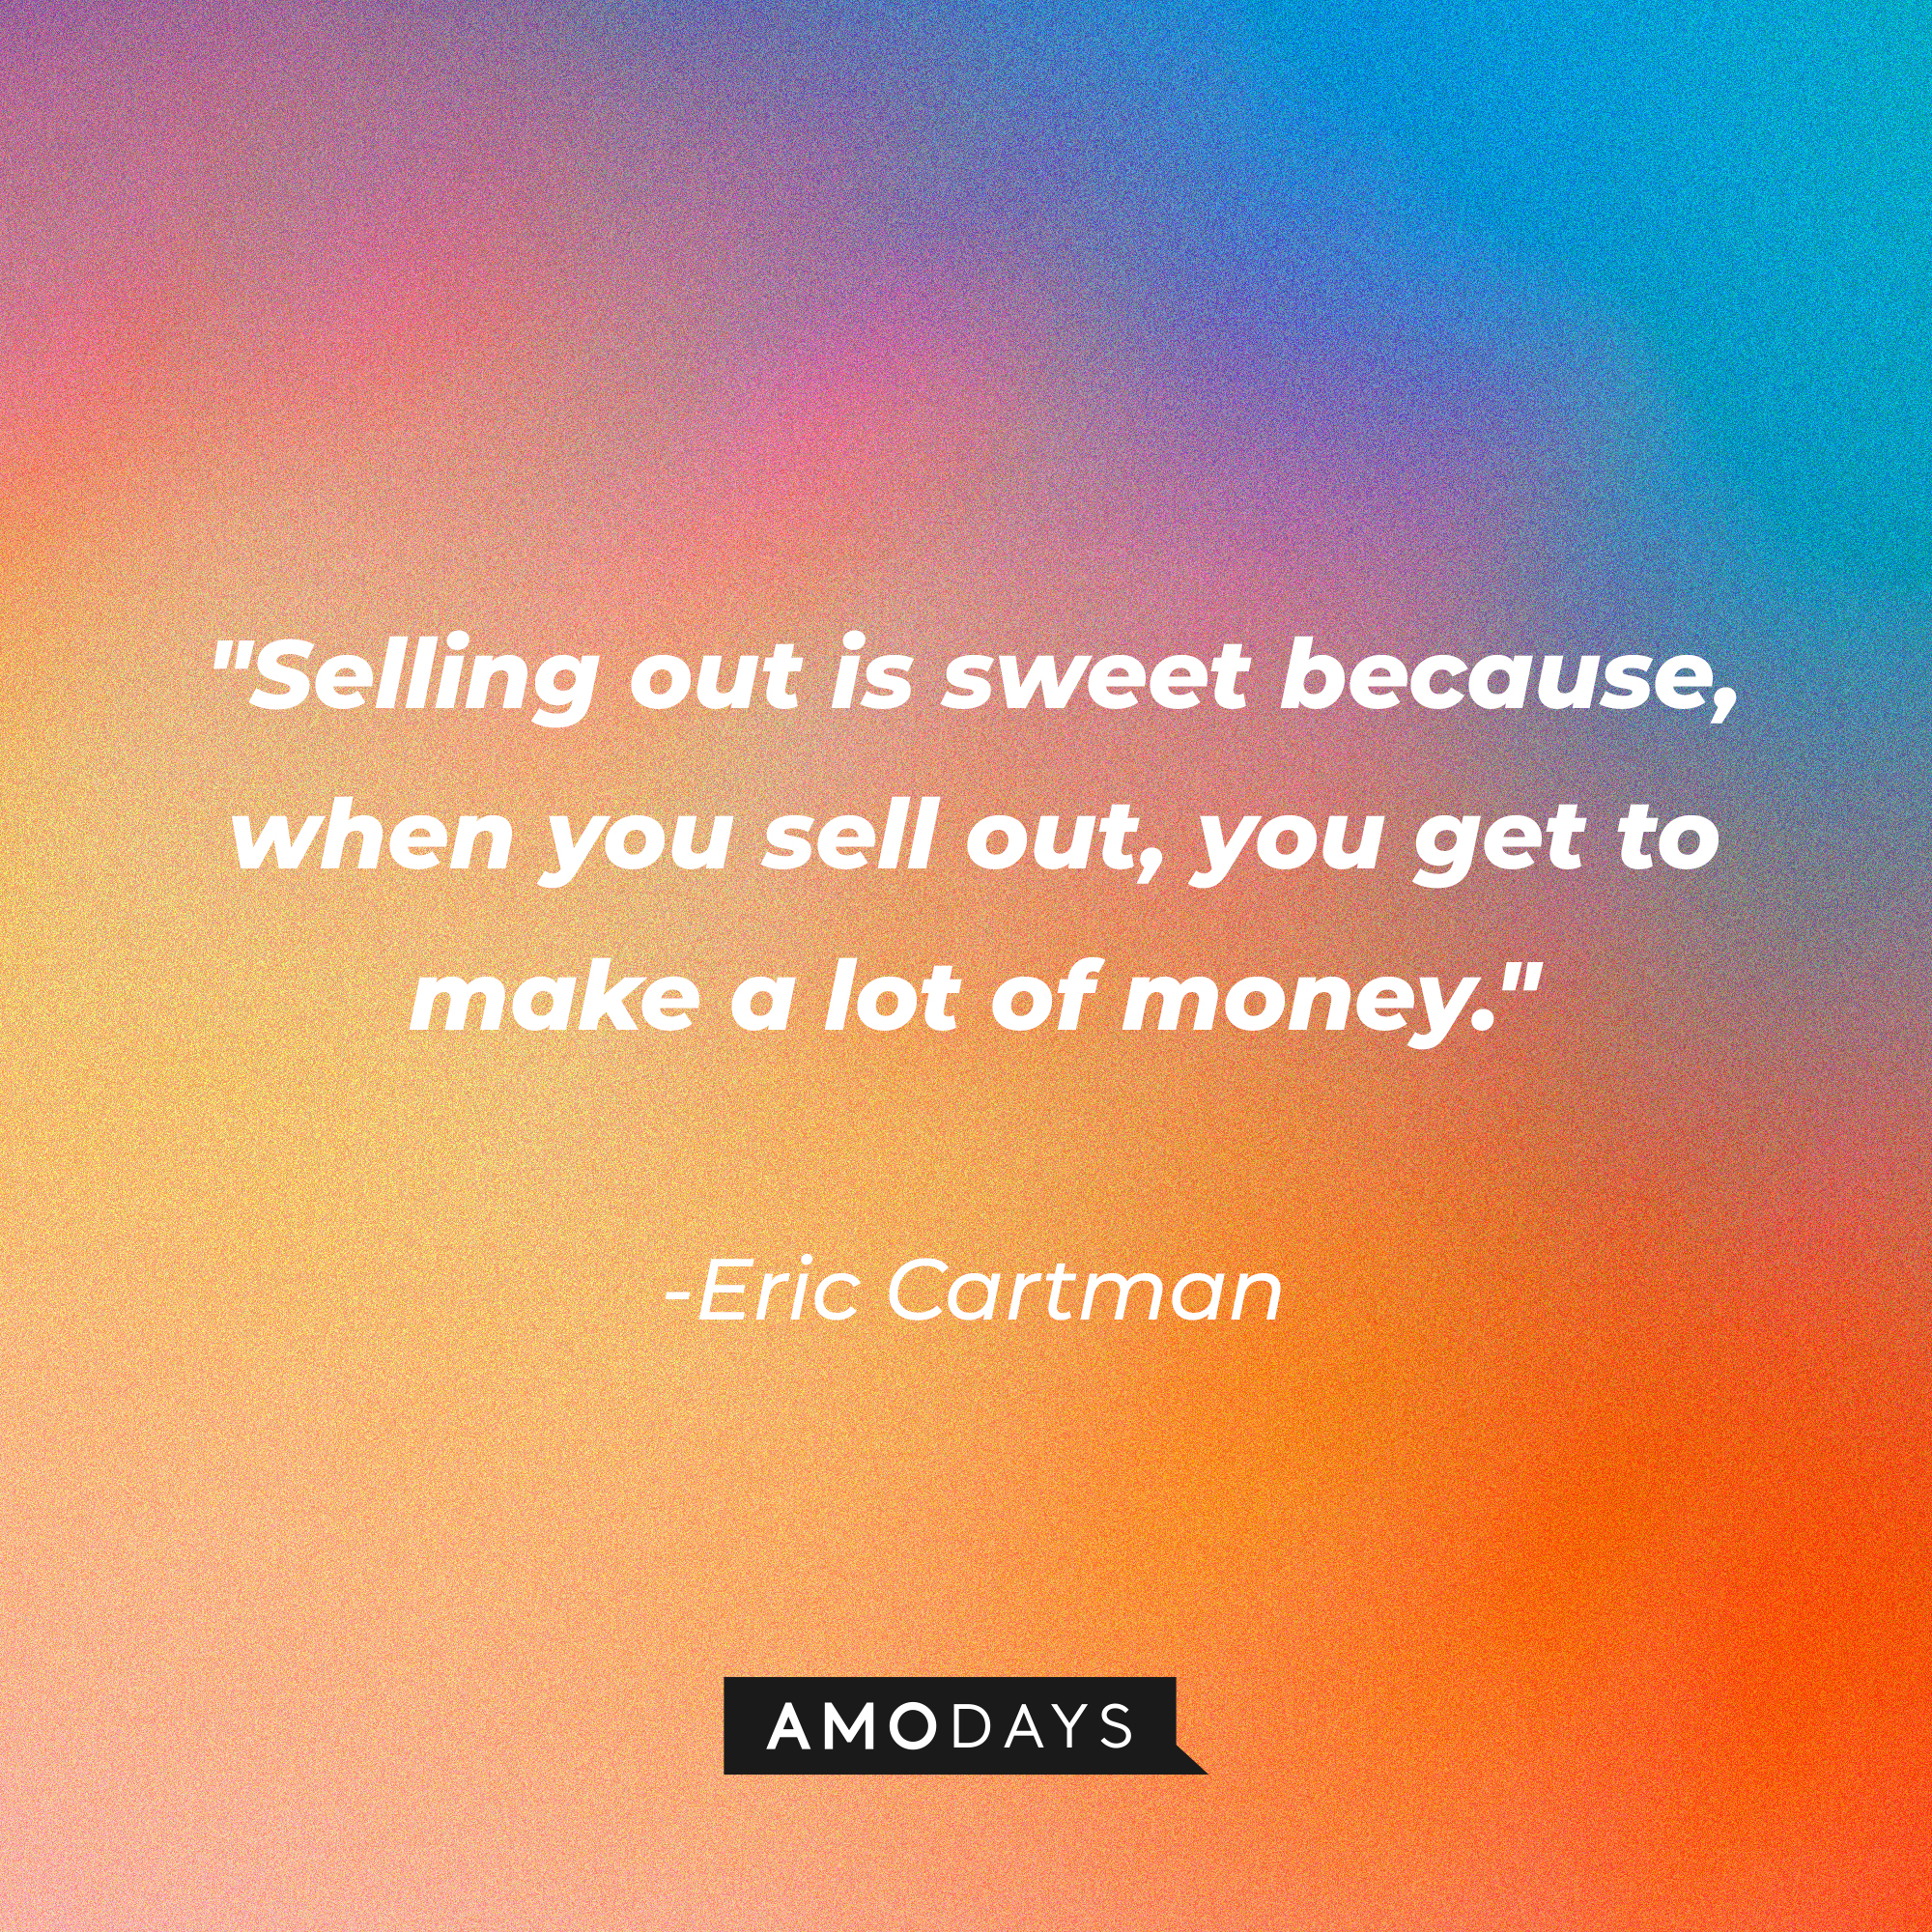 Eric Cartman's quote: "Selling out is sweet because, when you sell out, you get to make a lot of money." | Source: AmoDays